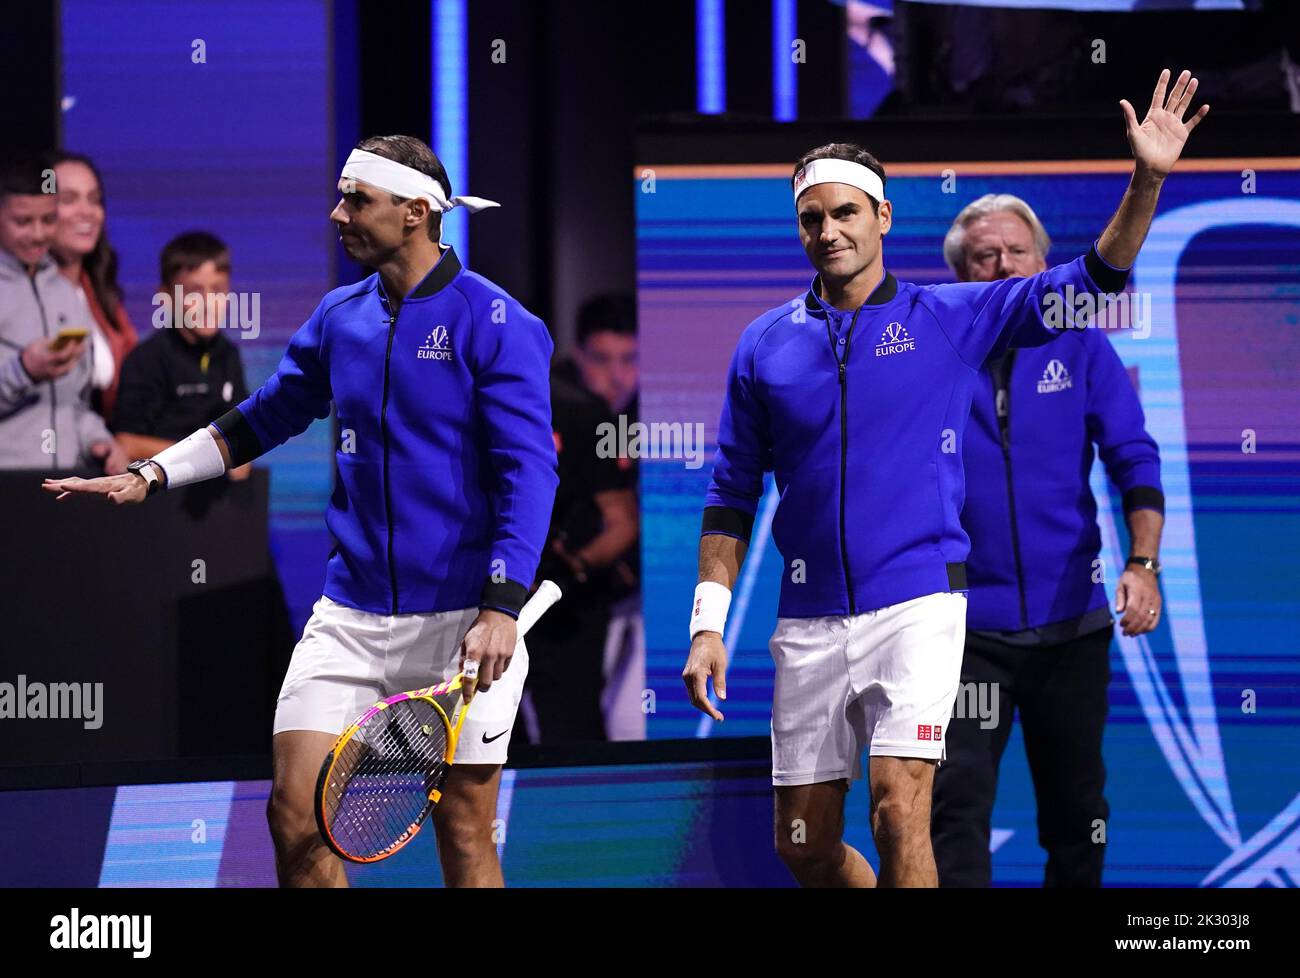 Team Europe's Rafael Nadal (left) and Roger Federer walk out to start their match on day one of the Laver Cup at the O2 Arena, London. Picture date: Friday September 23, 2022. Stock Photo